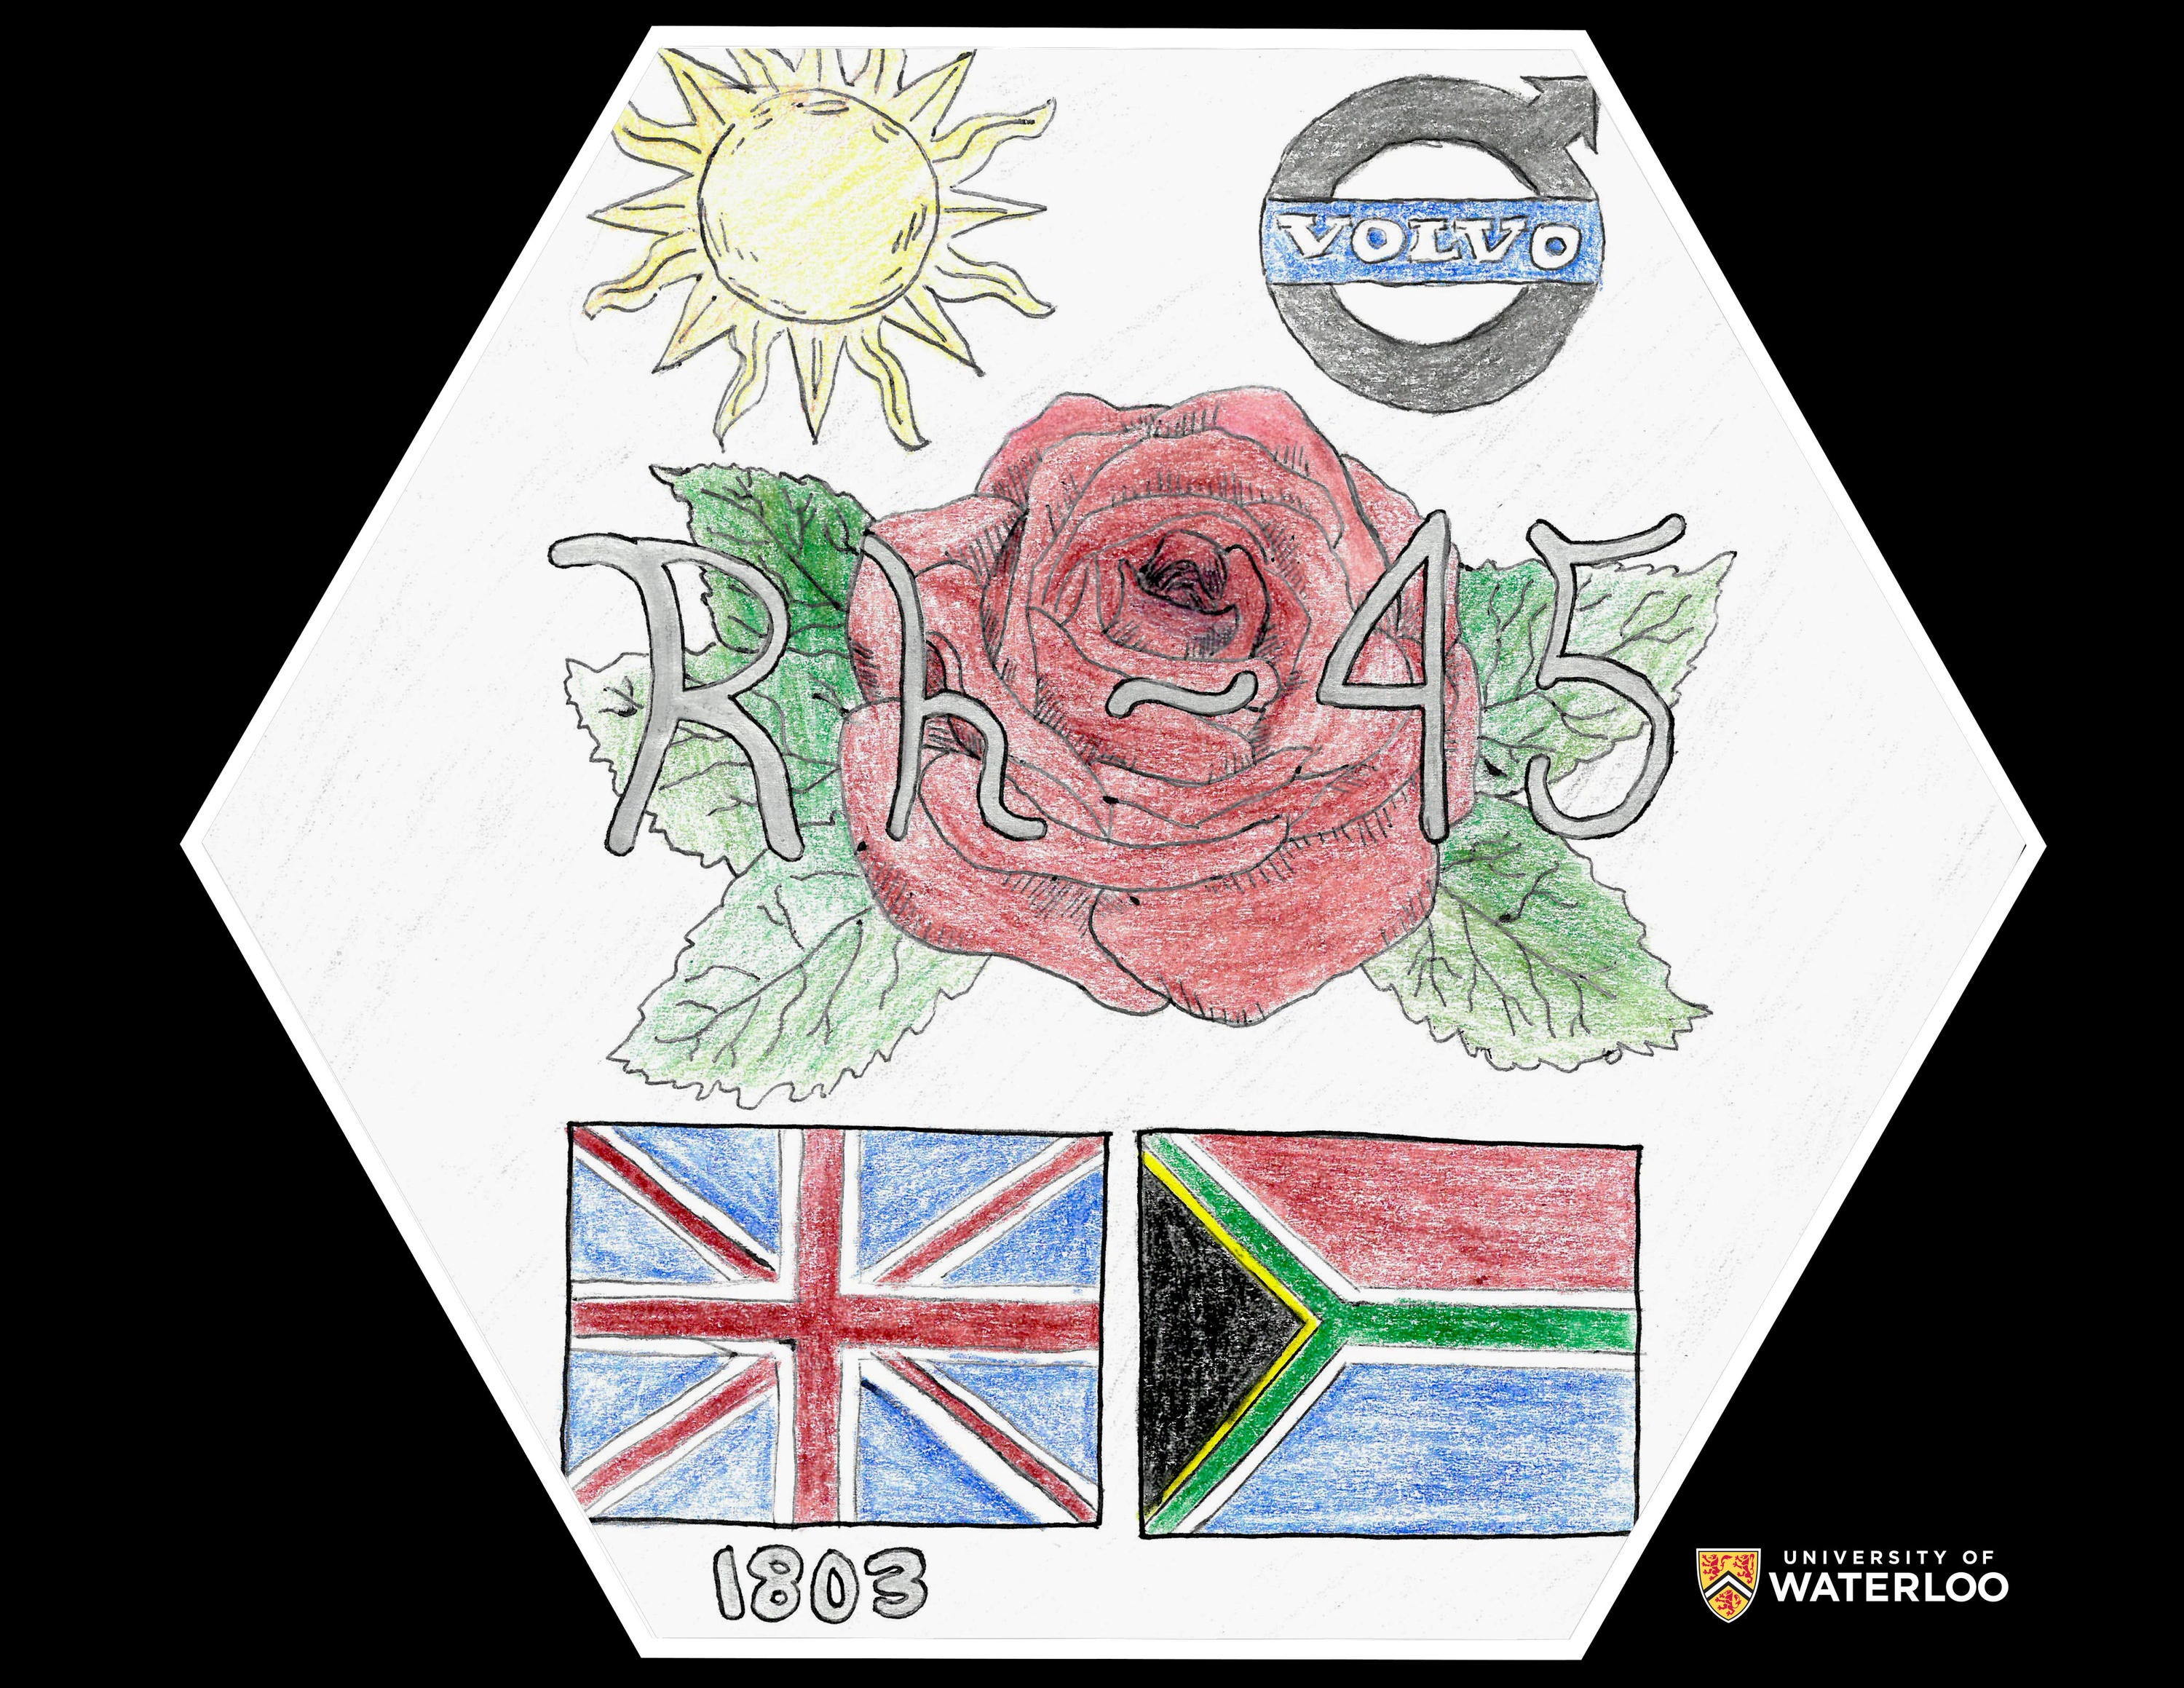 Coloured pencil and ink on white paper. Chemical symbol “Rh – 45” illustrated in silver over top of a large red rose. Above a sun and the logo for Volvo. Bottom are the British and the South African flags with the year “1803”.